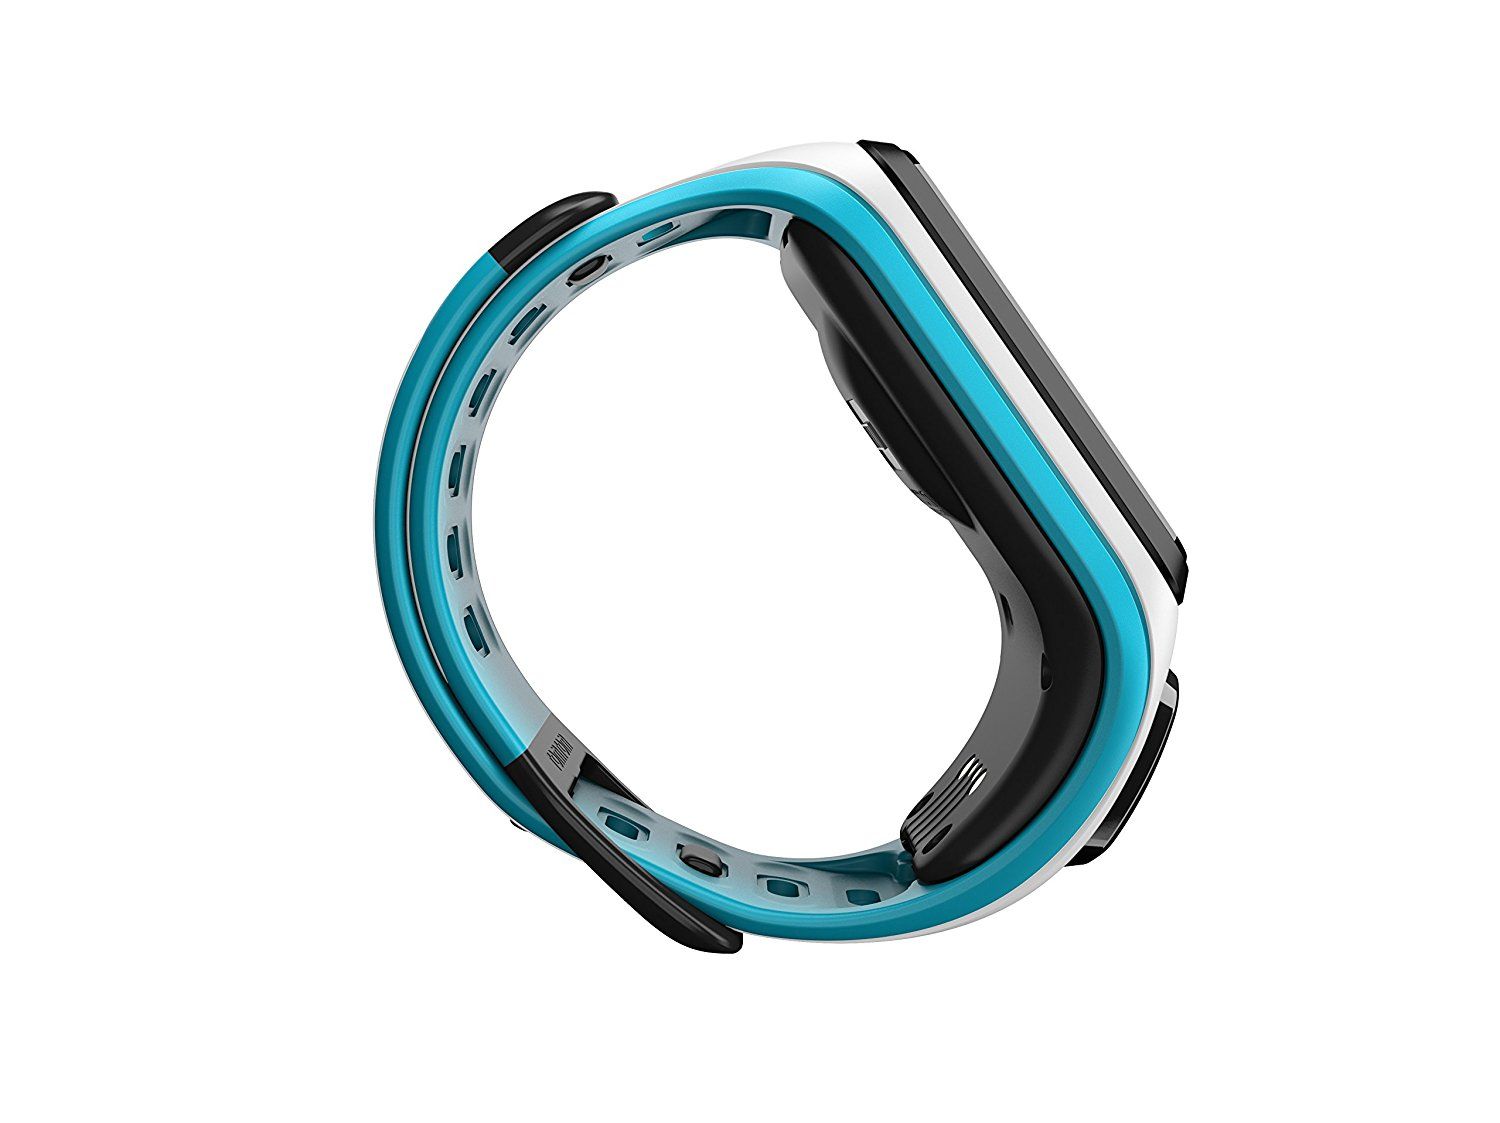 A fitness tracker watch with a heart rate monitor and GPS capabilities.